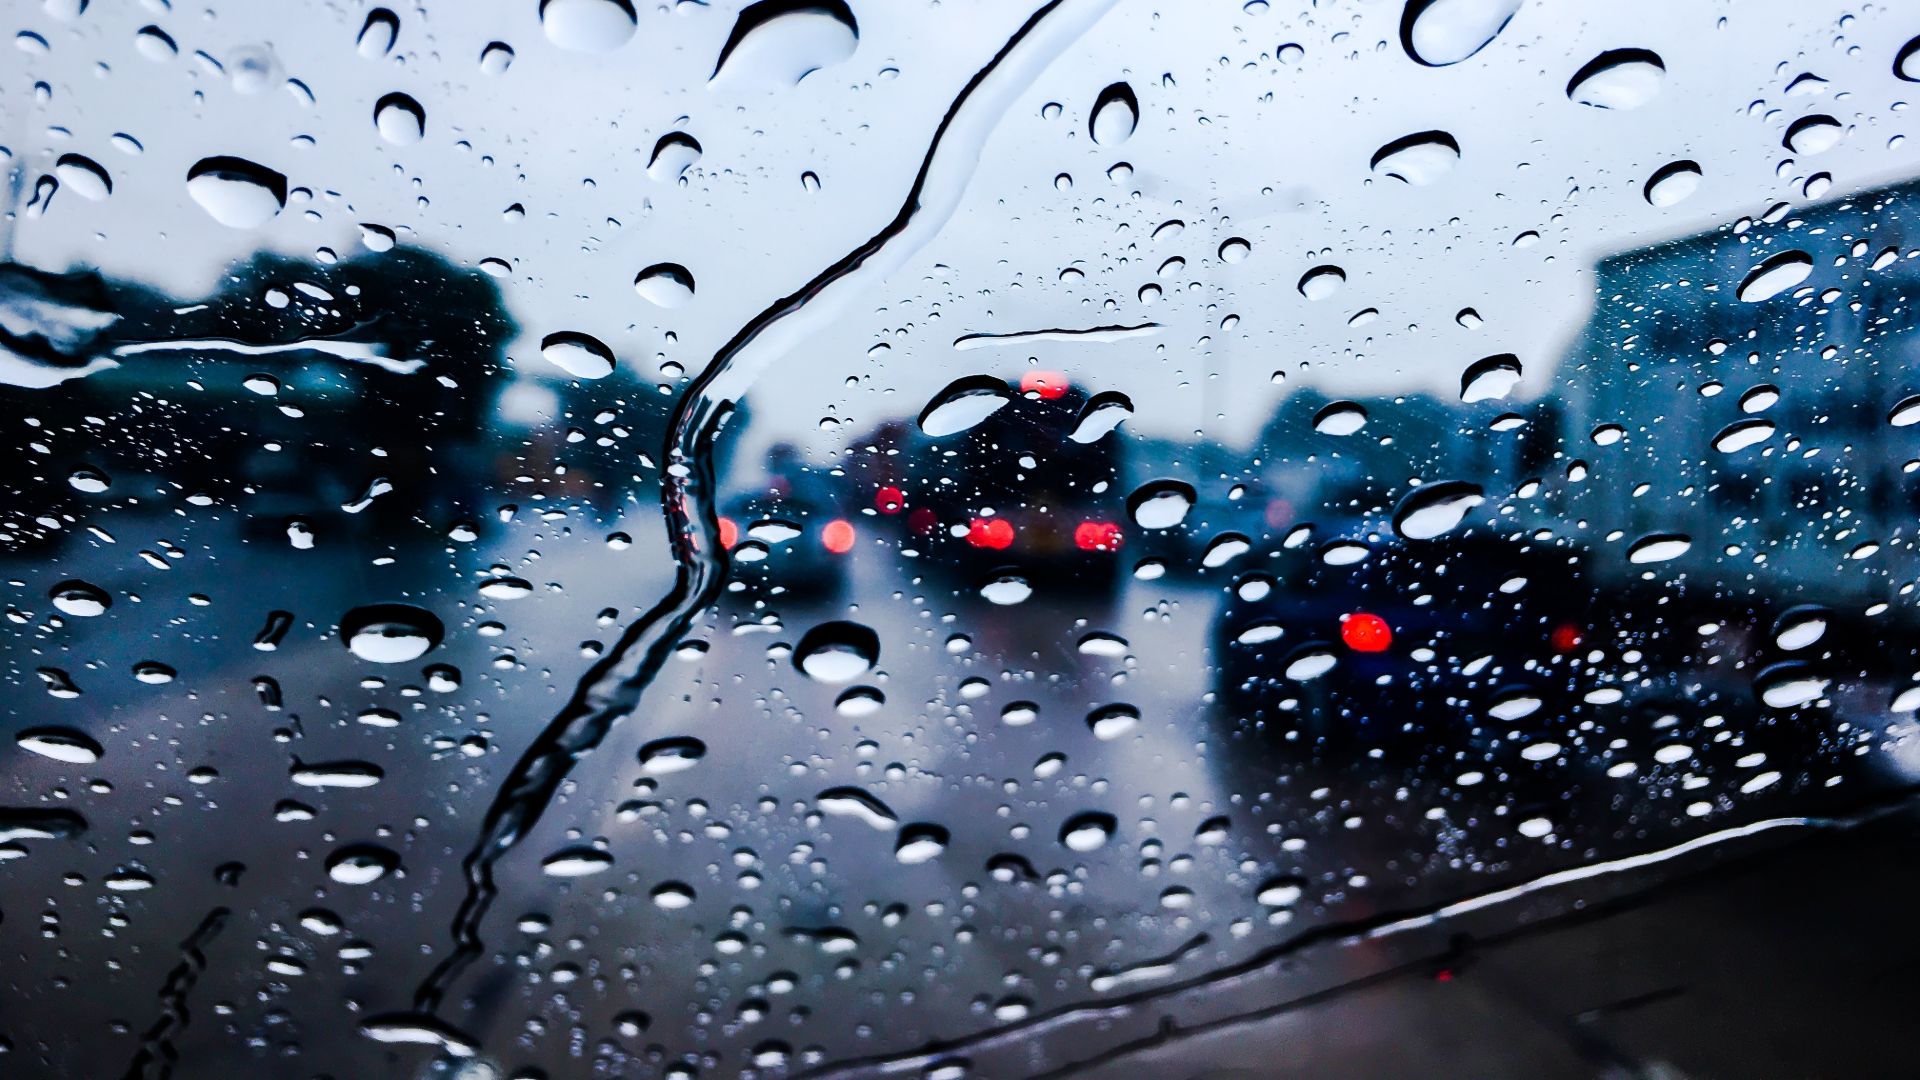 Motorists aren't confident driving in stormy conditions